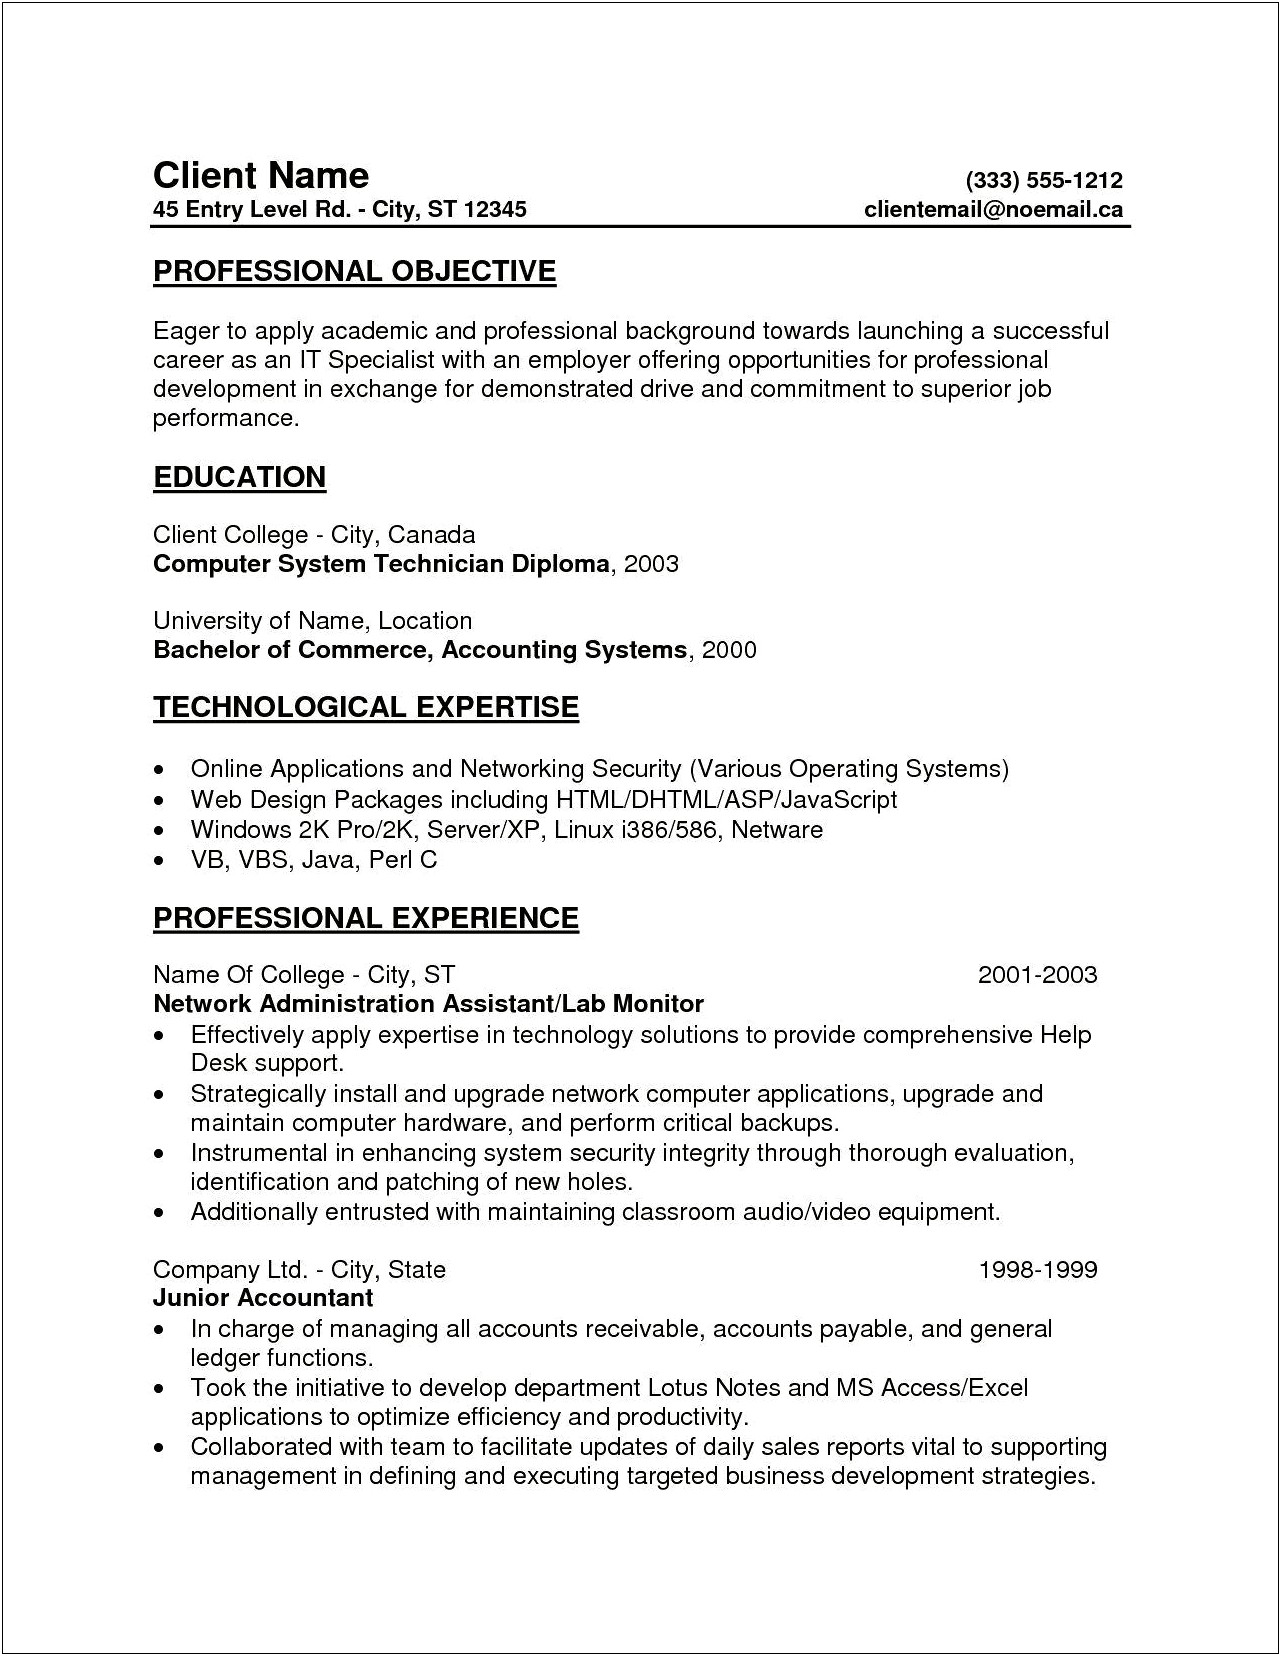 Experienced It Professional Resume Objective